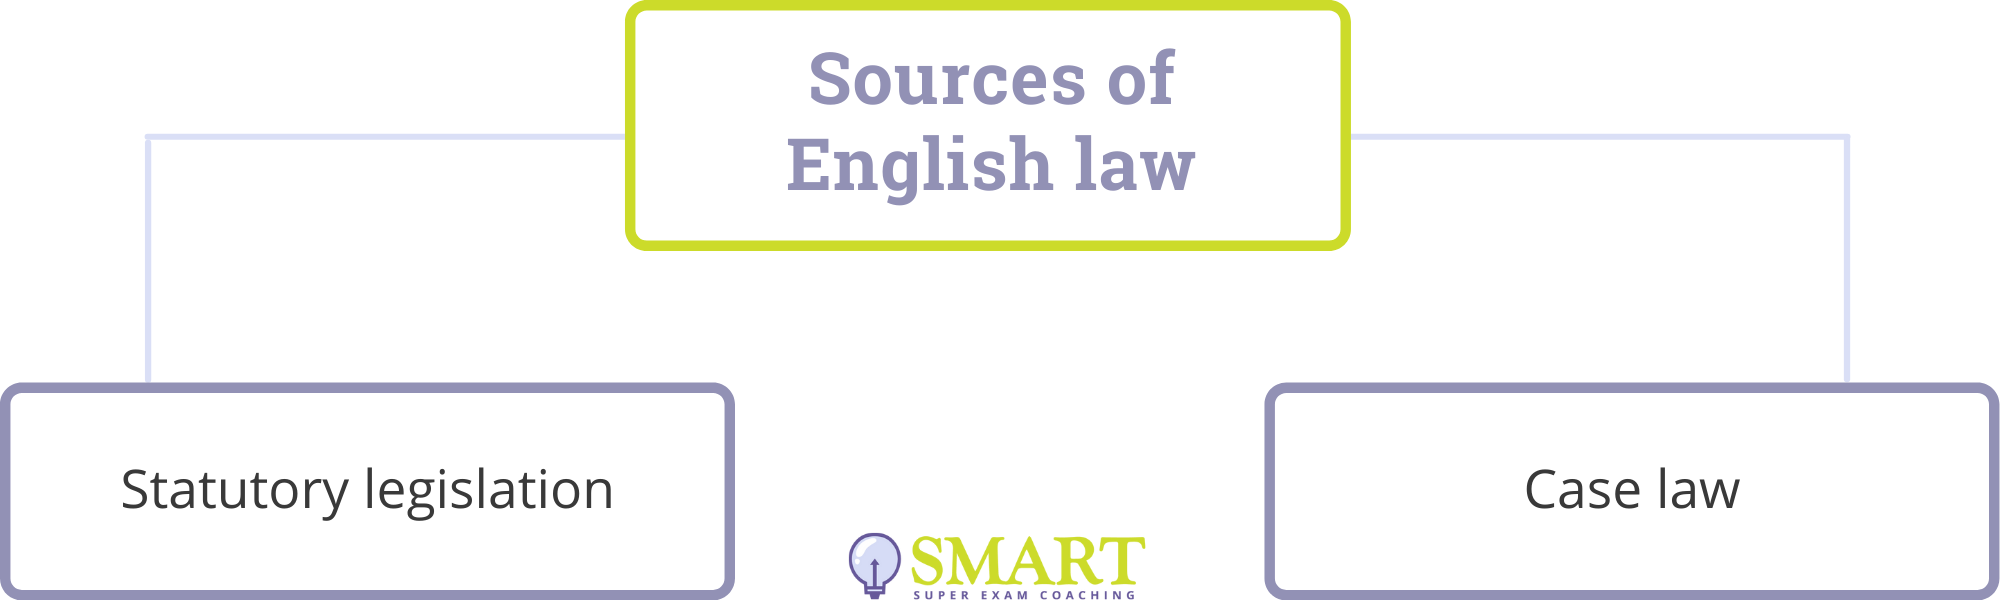 English Legal System - Sources of English Law